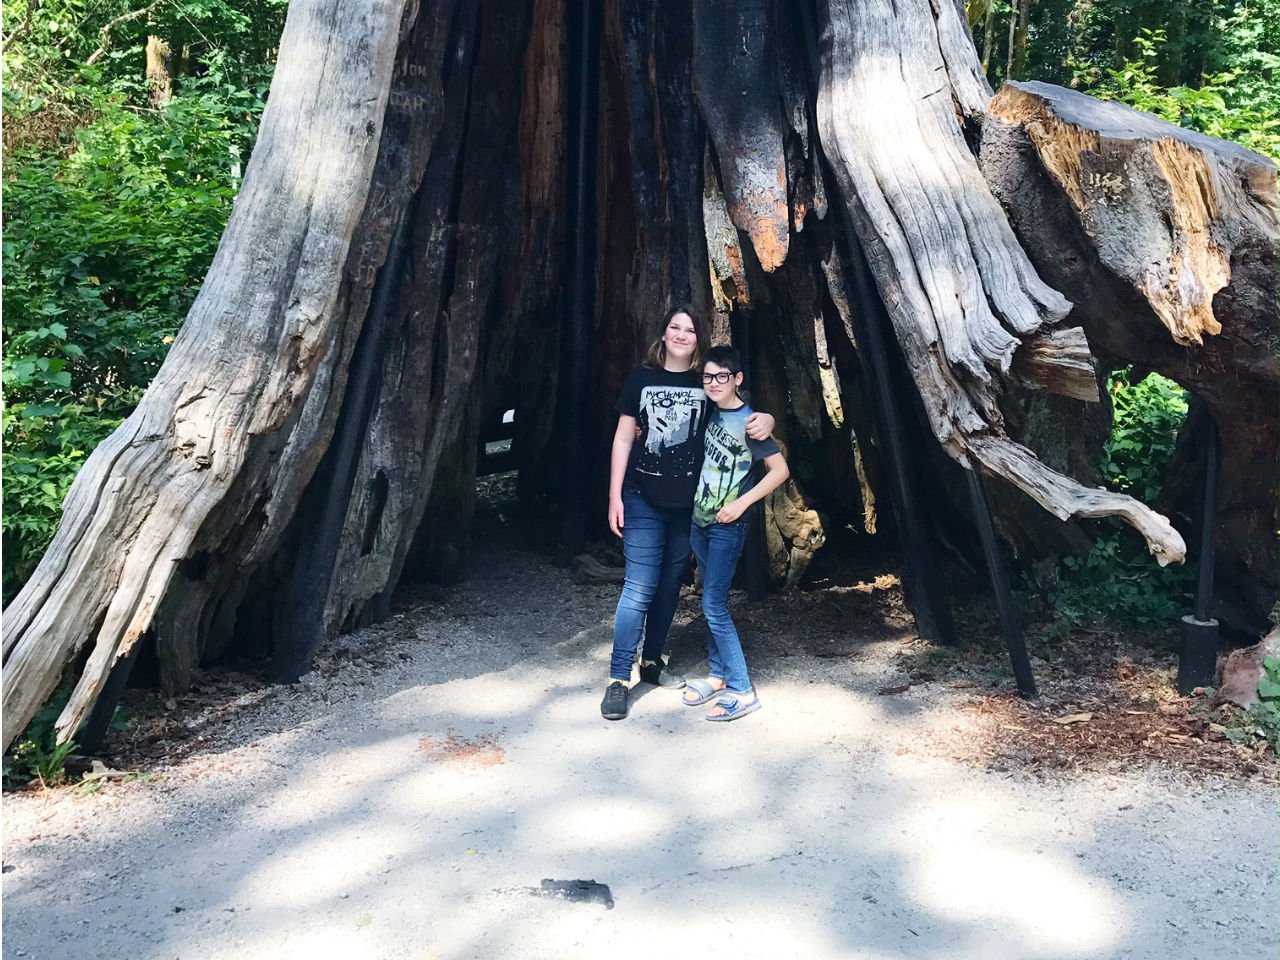 trans daughter-Zoe and Amanda's two children pose at the foot of a giant tree while on family vacation.